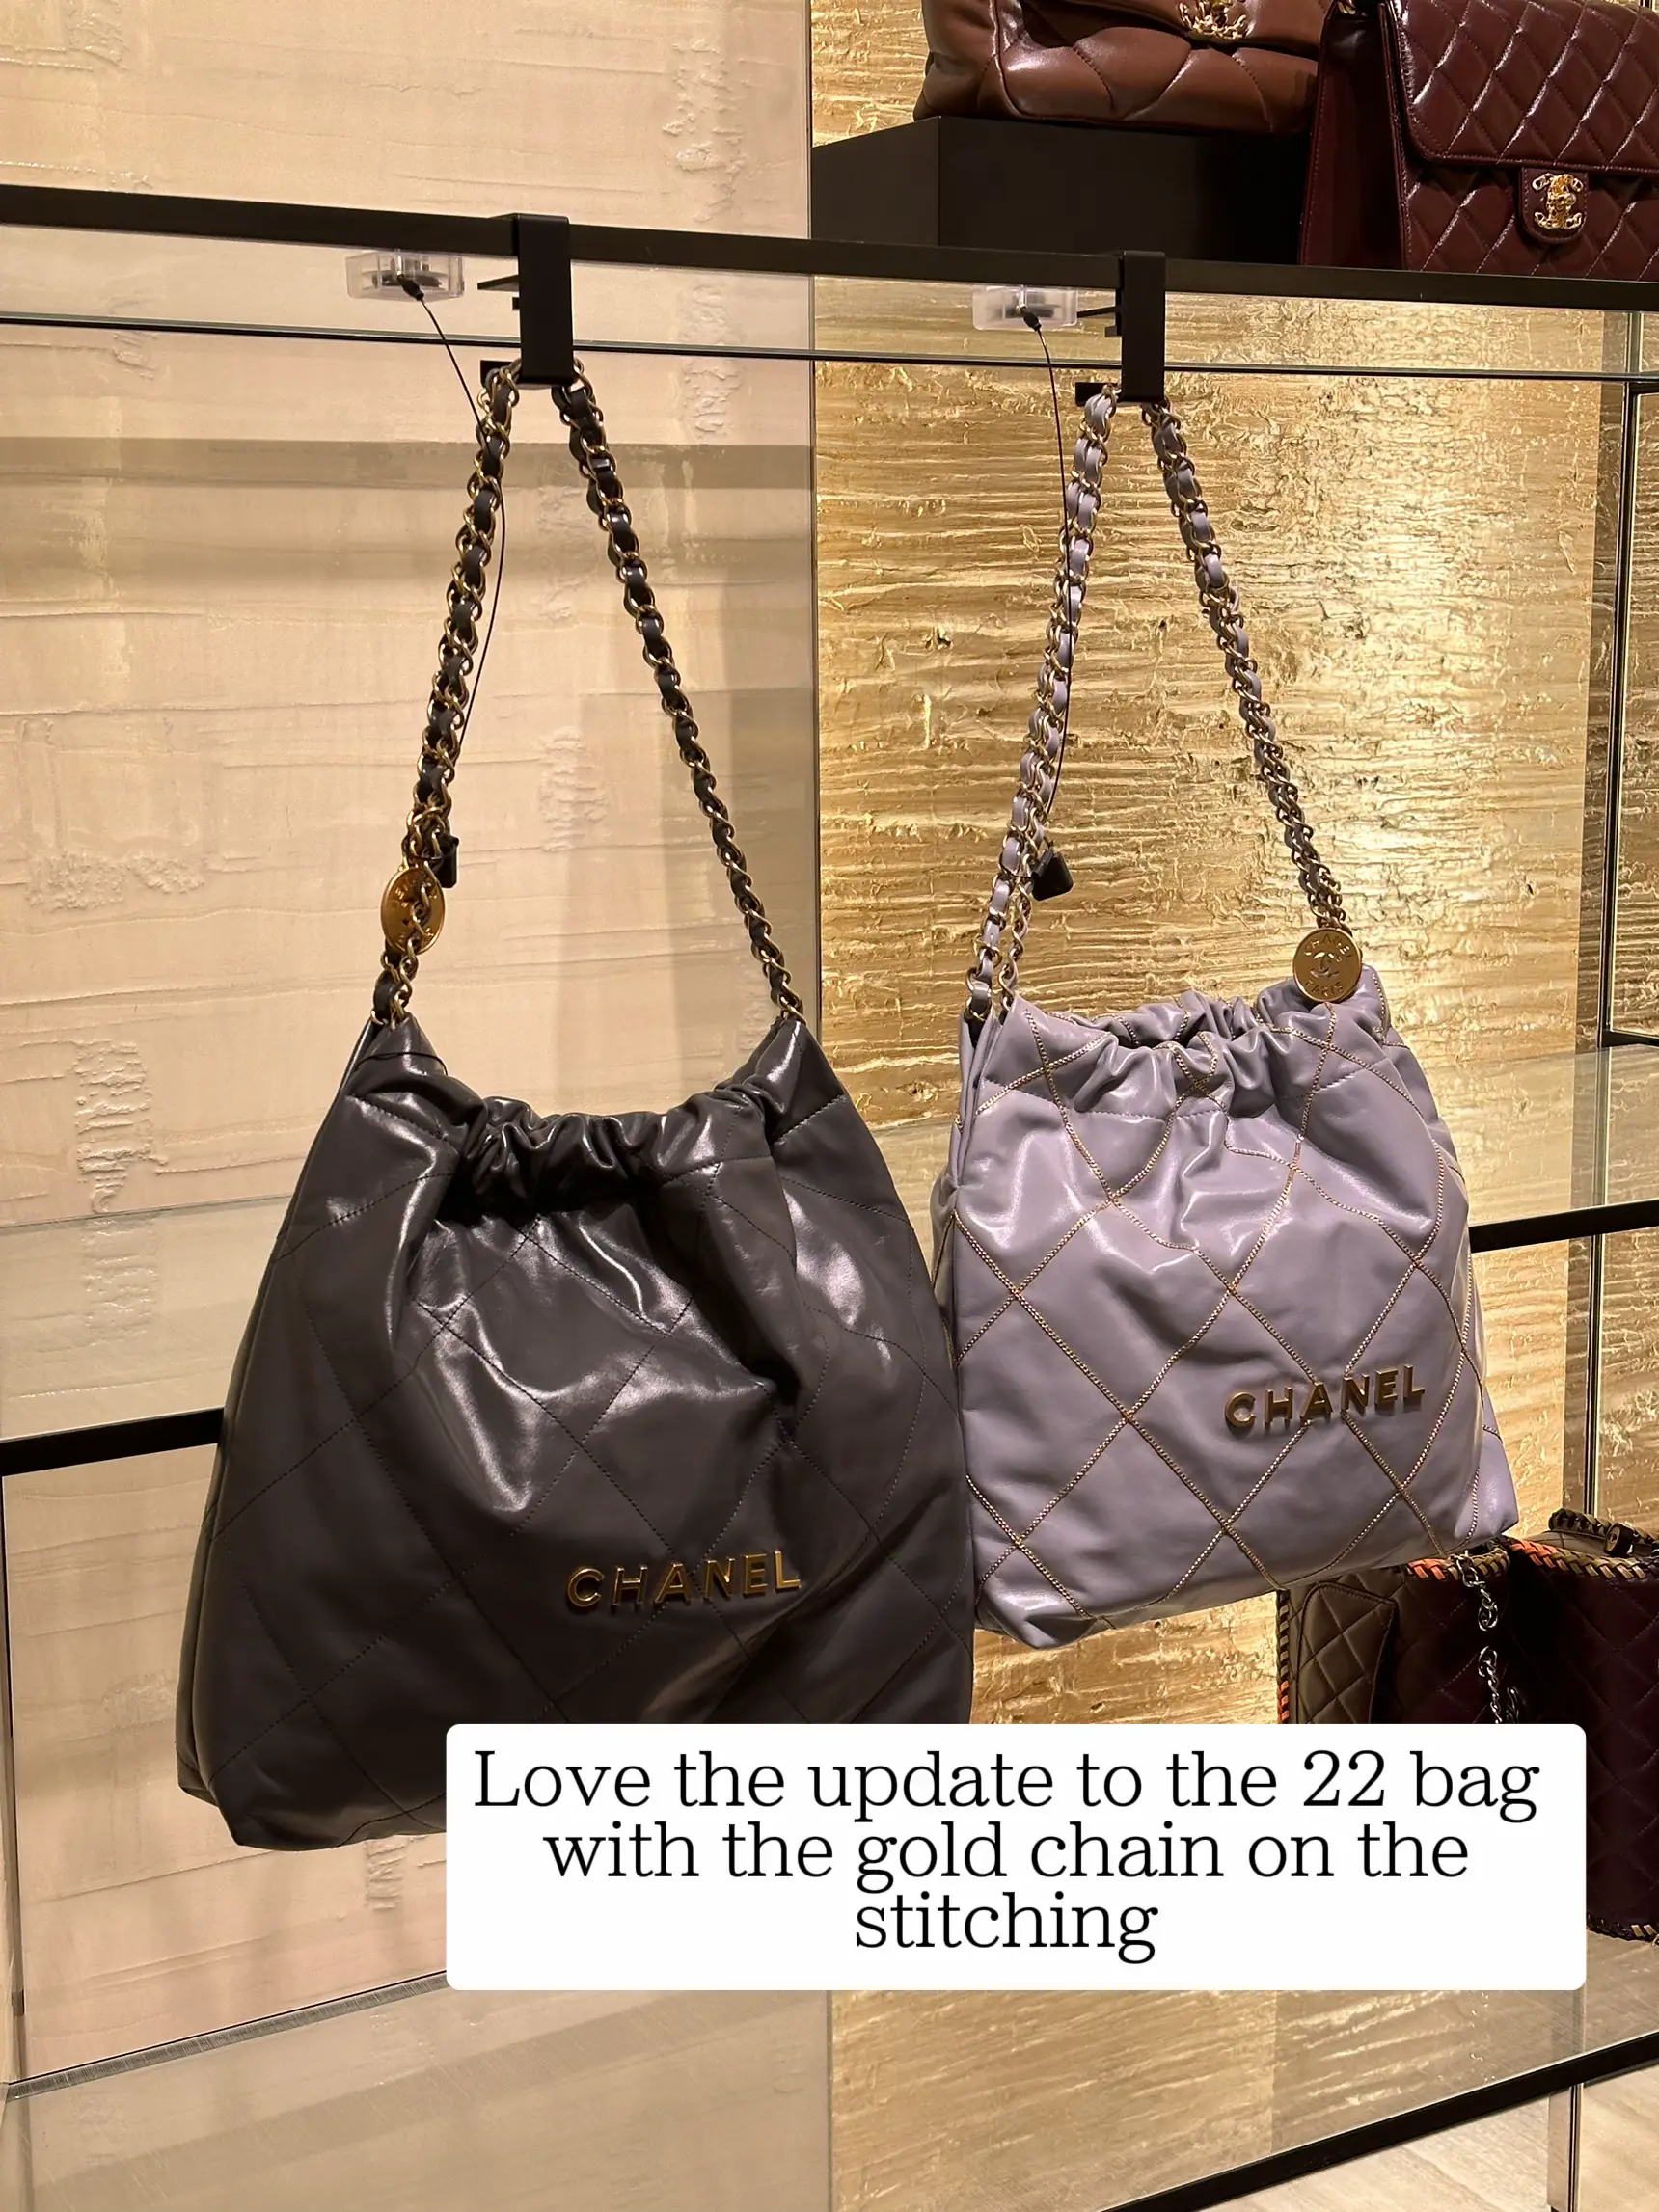 22 reasons to love the Chanel 22 Bag